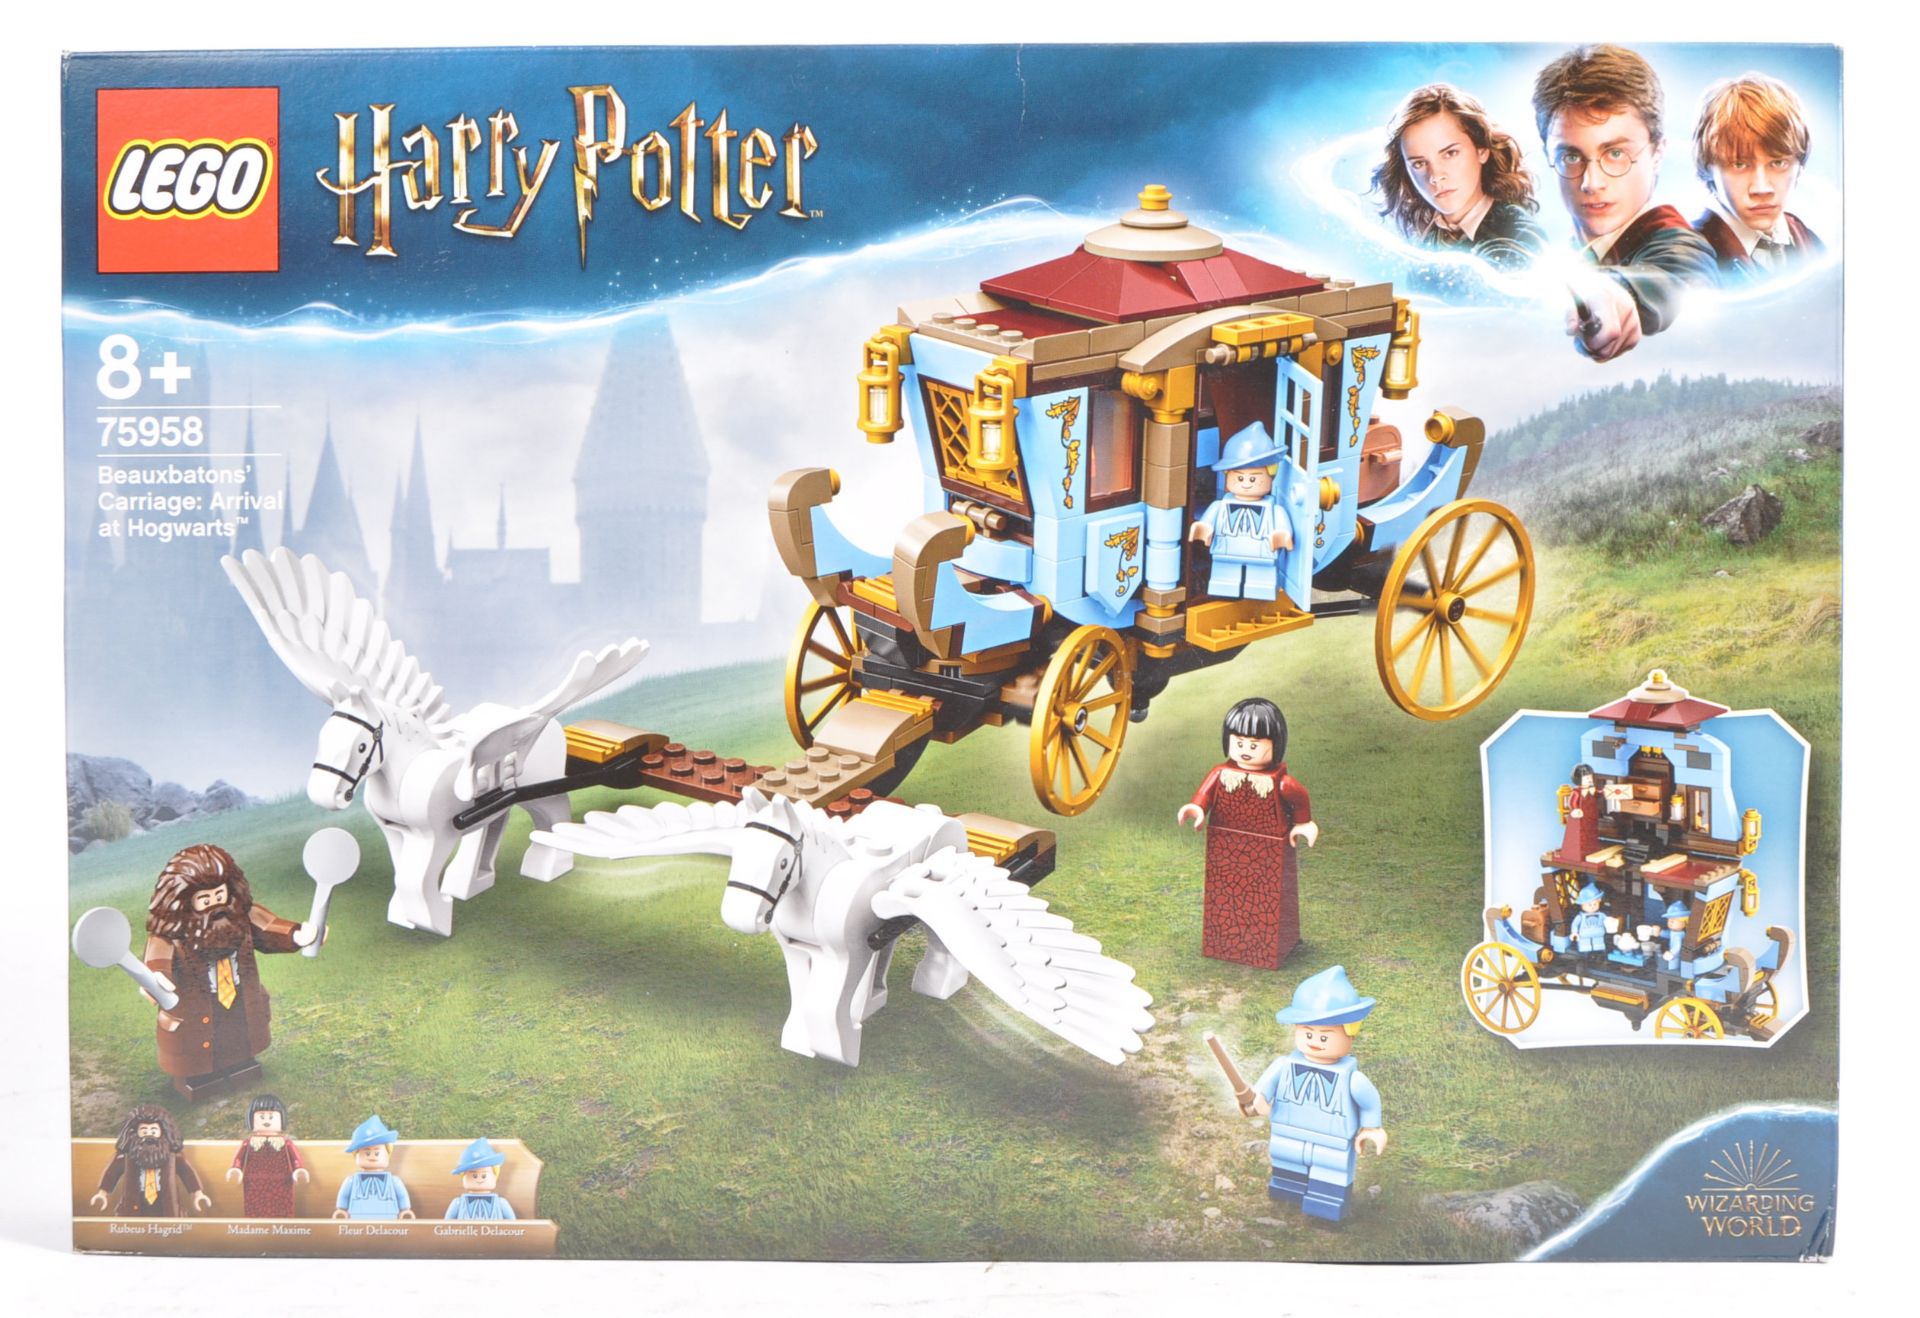 LEGO SET - HARRY POTTER - 75958 - BEAUXBATONS' CARRIAGE: ARRIVAL AT HOGWARTS